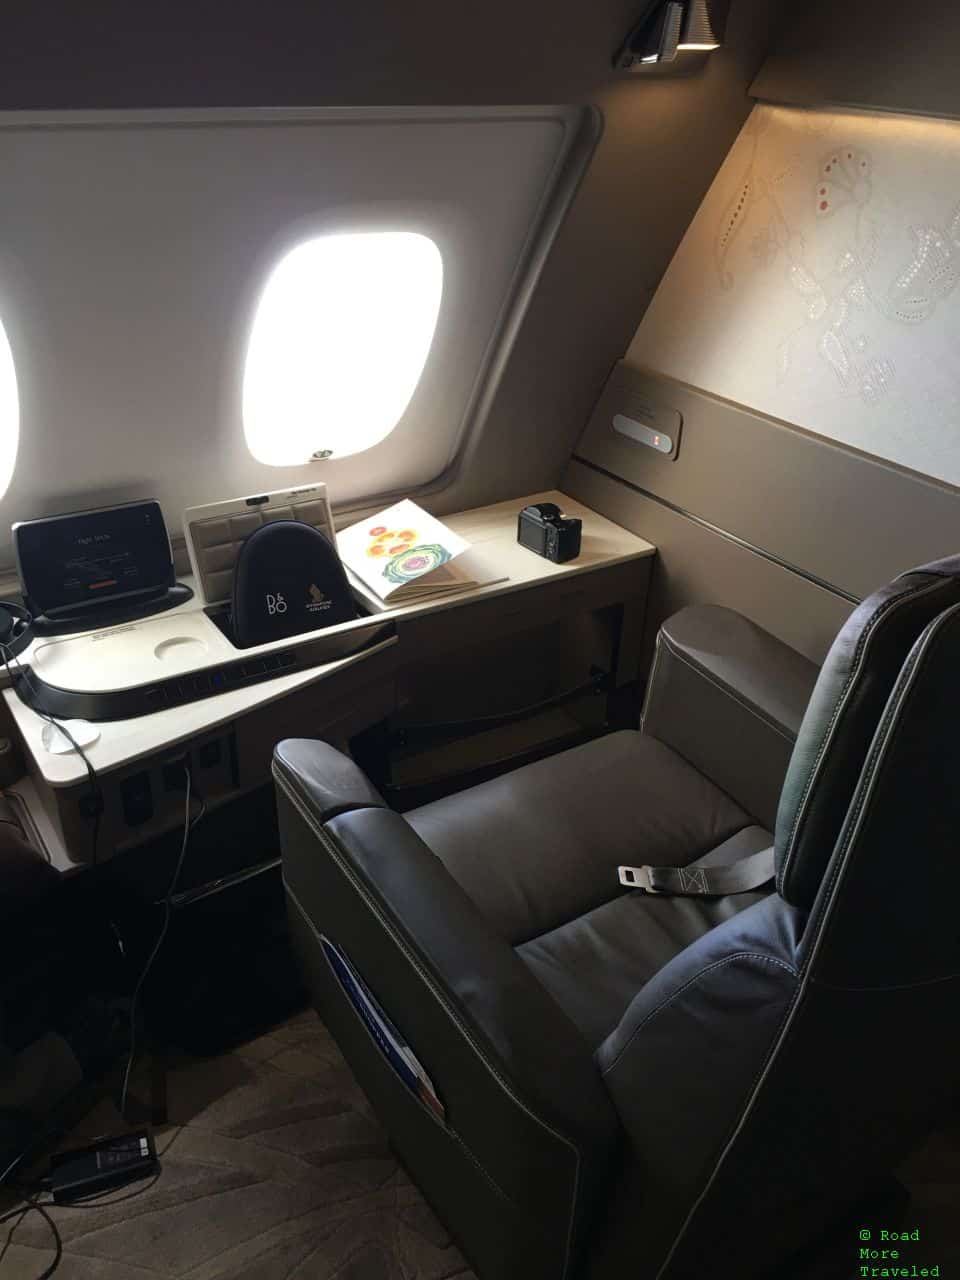 Singapore Airlines A380 Suites Class - seat swiveled towards window